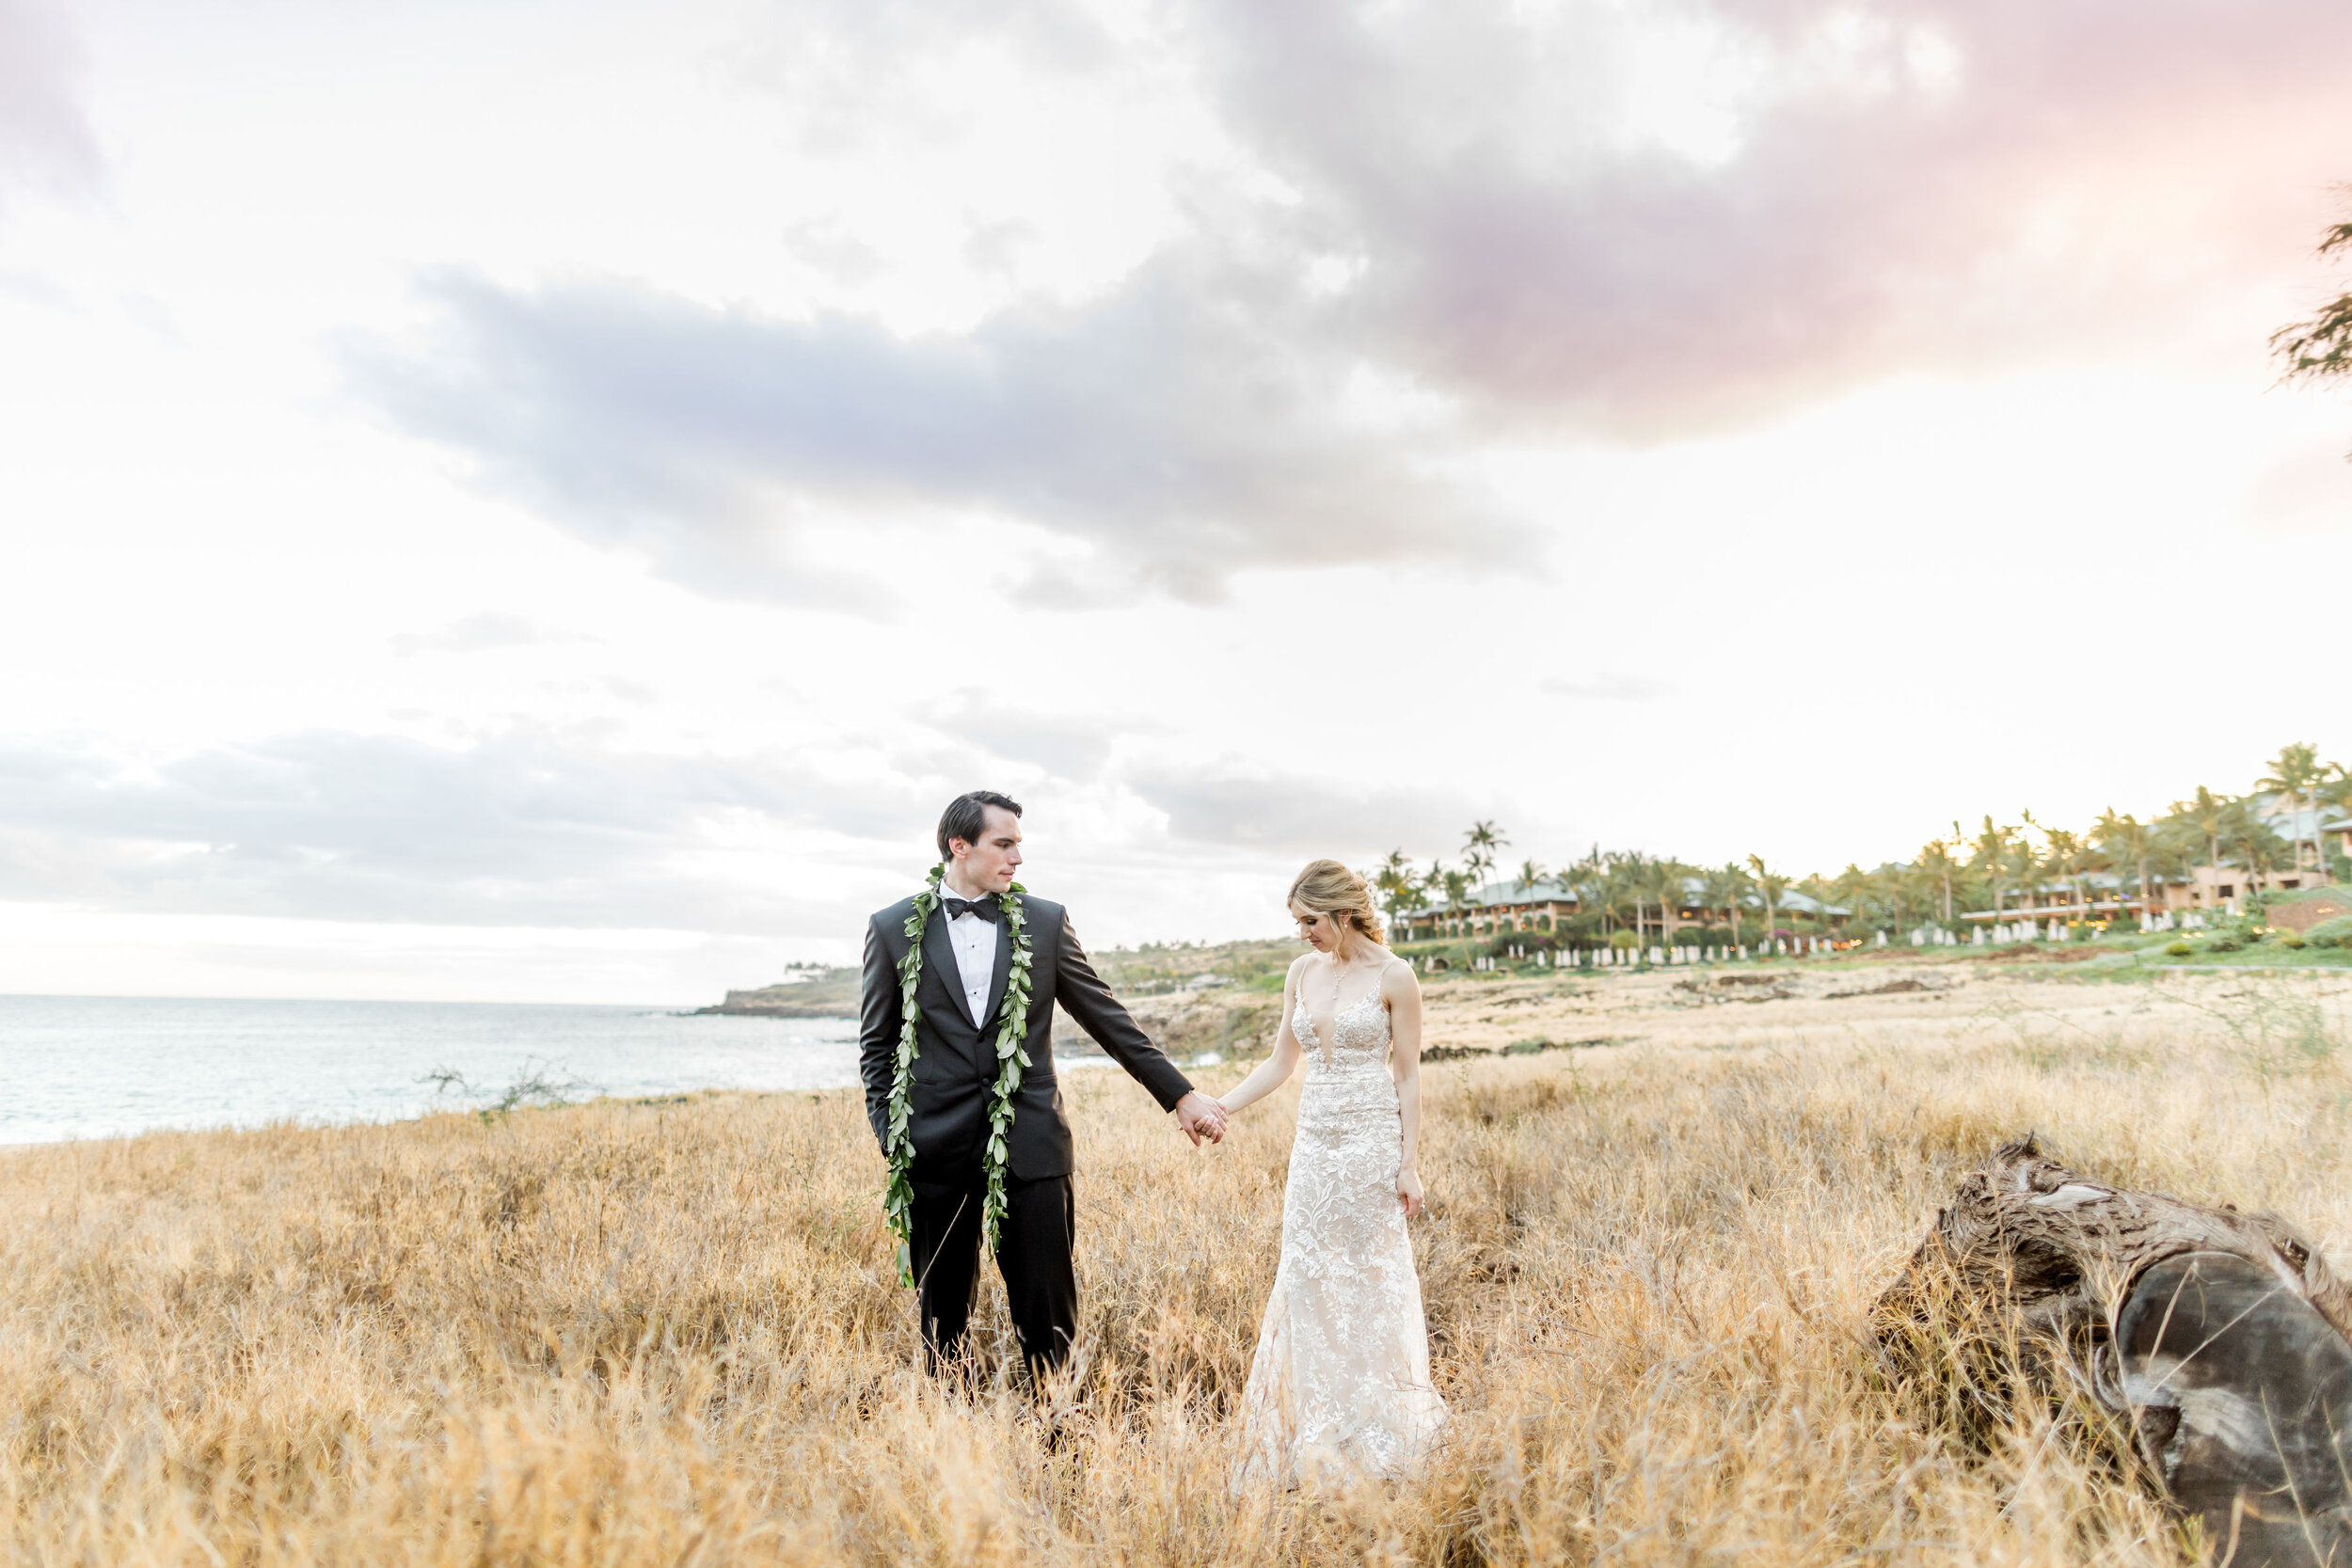 A bride in a lace gown and a groom in a classic tuxedo holding hands and walking through a field of golden tall grass, with the ocean at dusk and a distant beach beneath a pastel sky in the background.